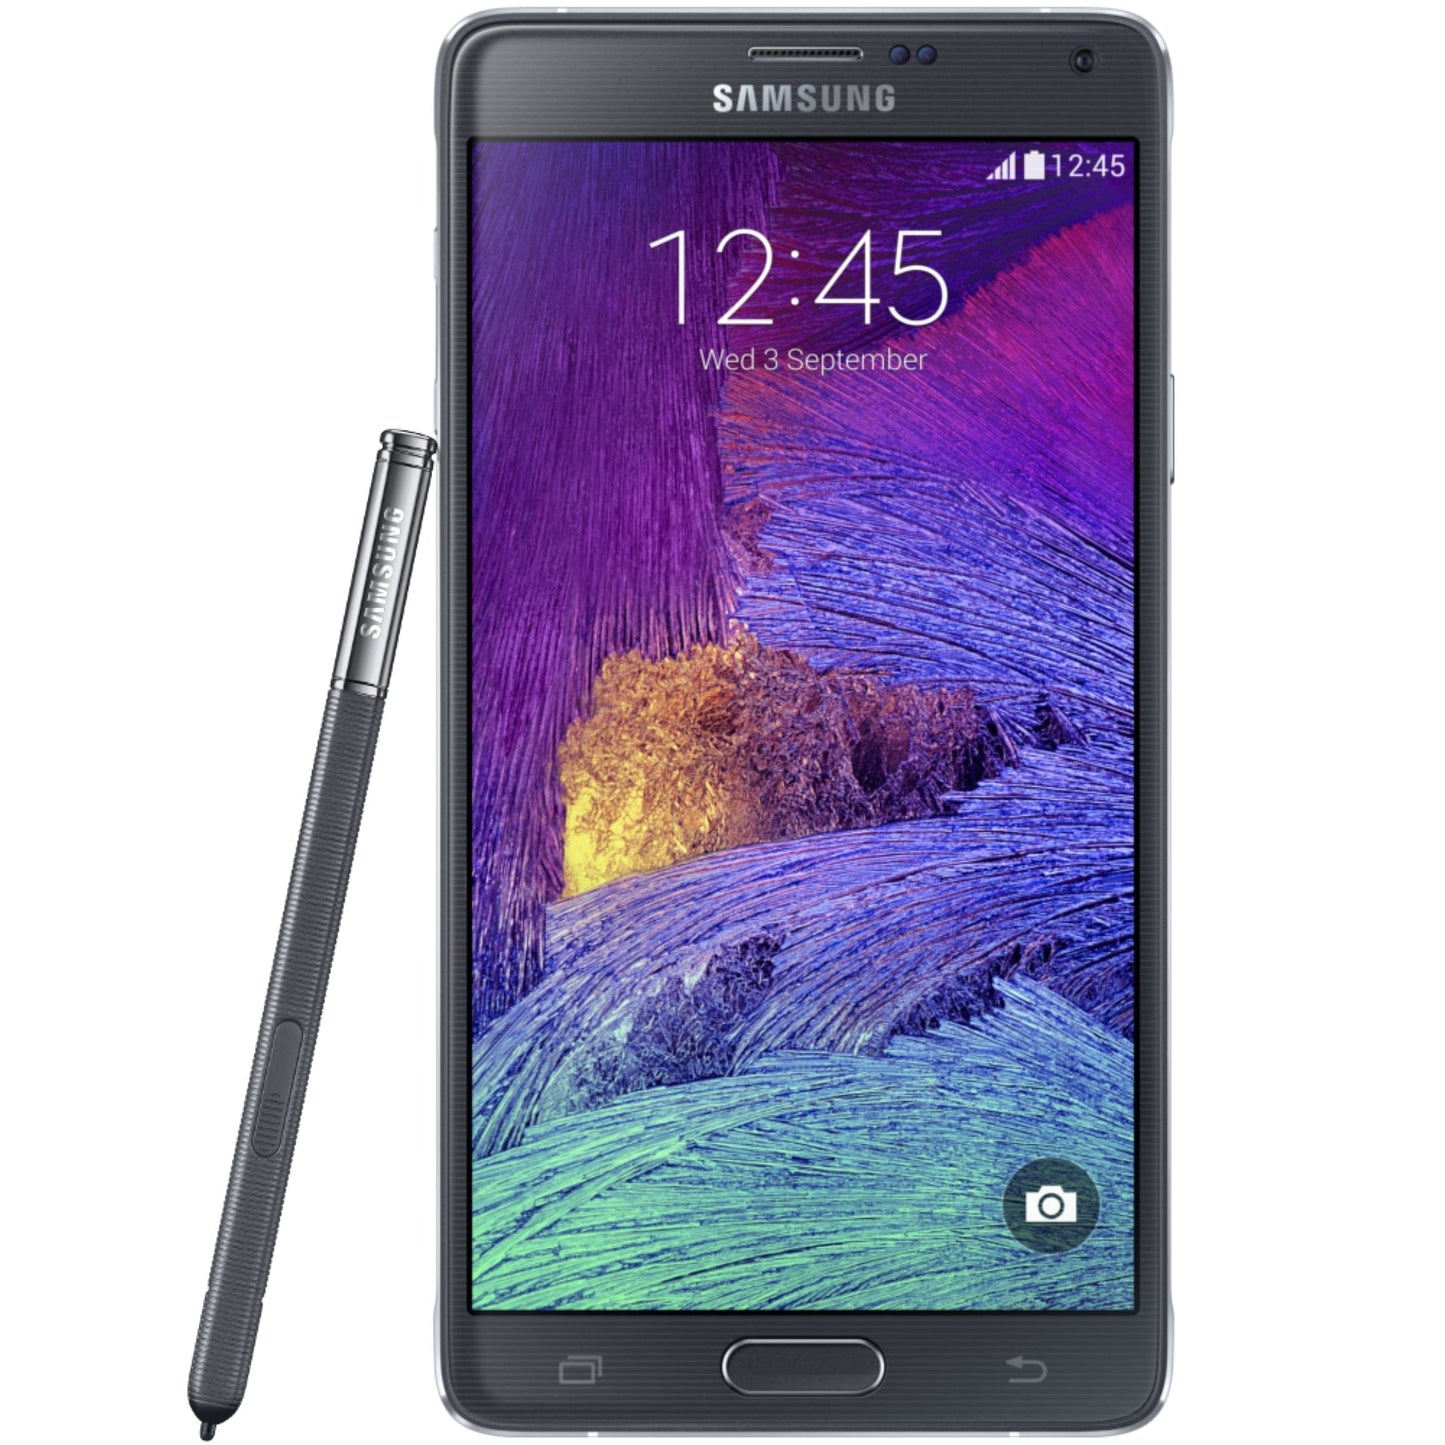 Samsung Galaxy Note 4 Android Cell-Phone - 32 GB - Charcoal Black